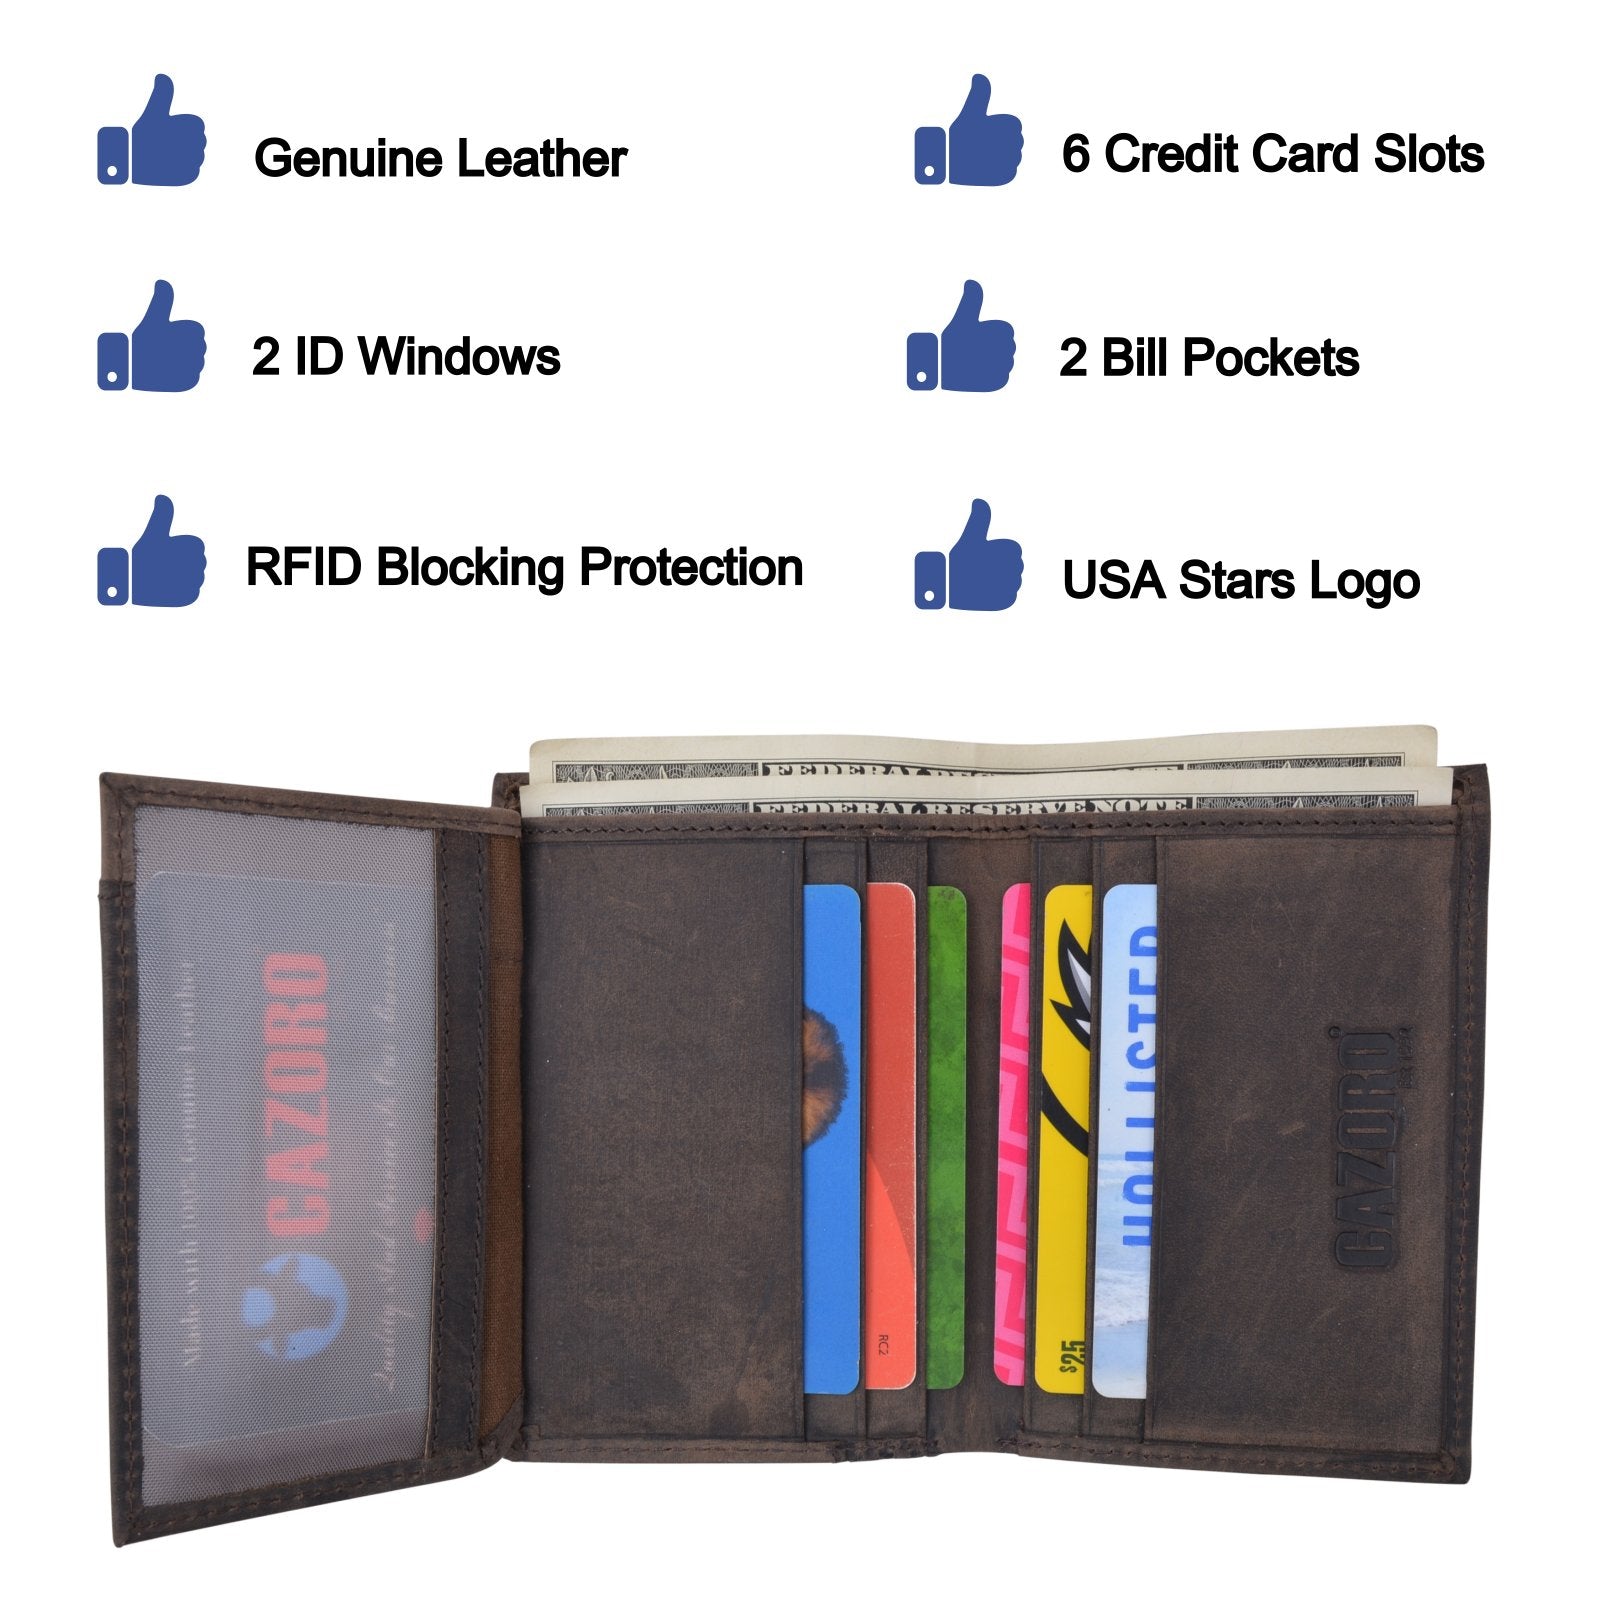 Marshal Wallet Leather Credit Card Holder Wallet for Men and Women, Thin Bifold RFID Blocking Wallet, Slim Front Pocket Minimalist Wallet, Small Card